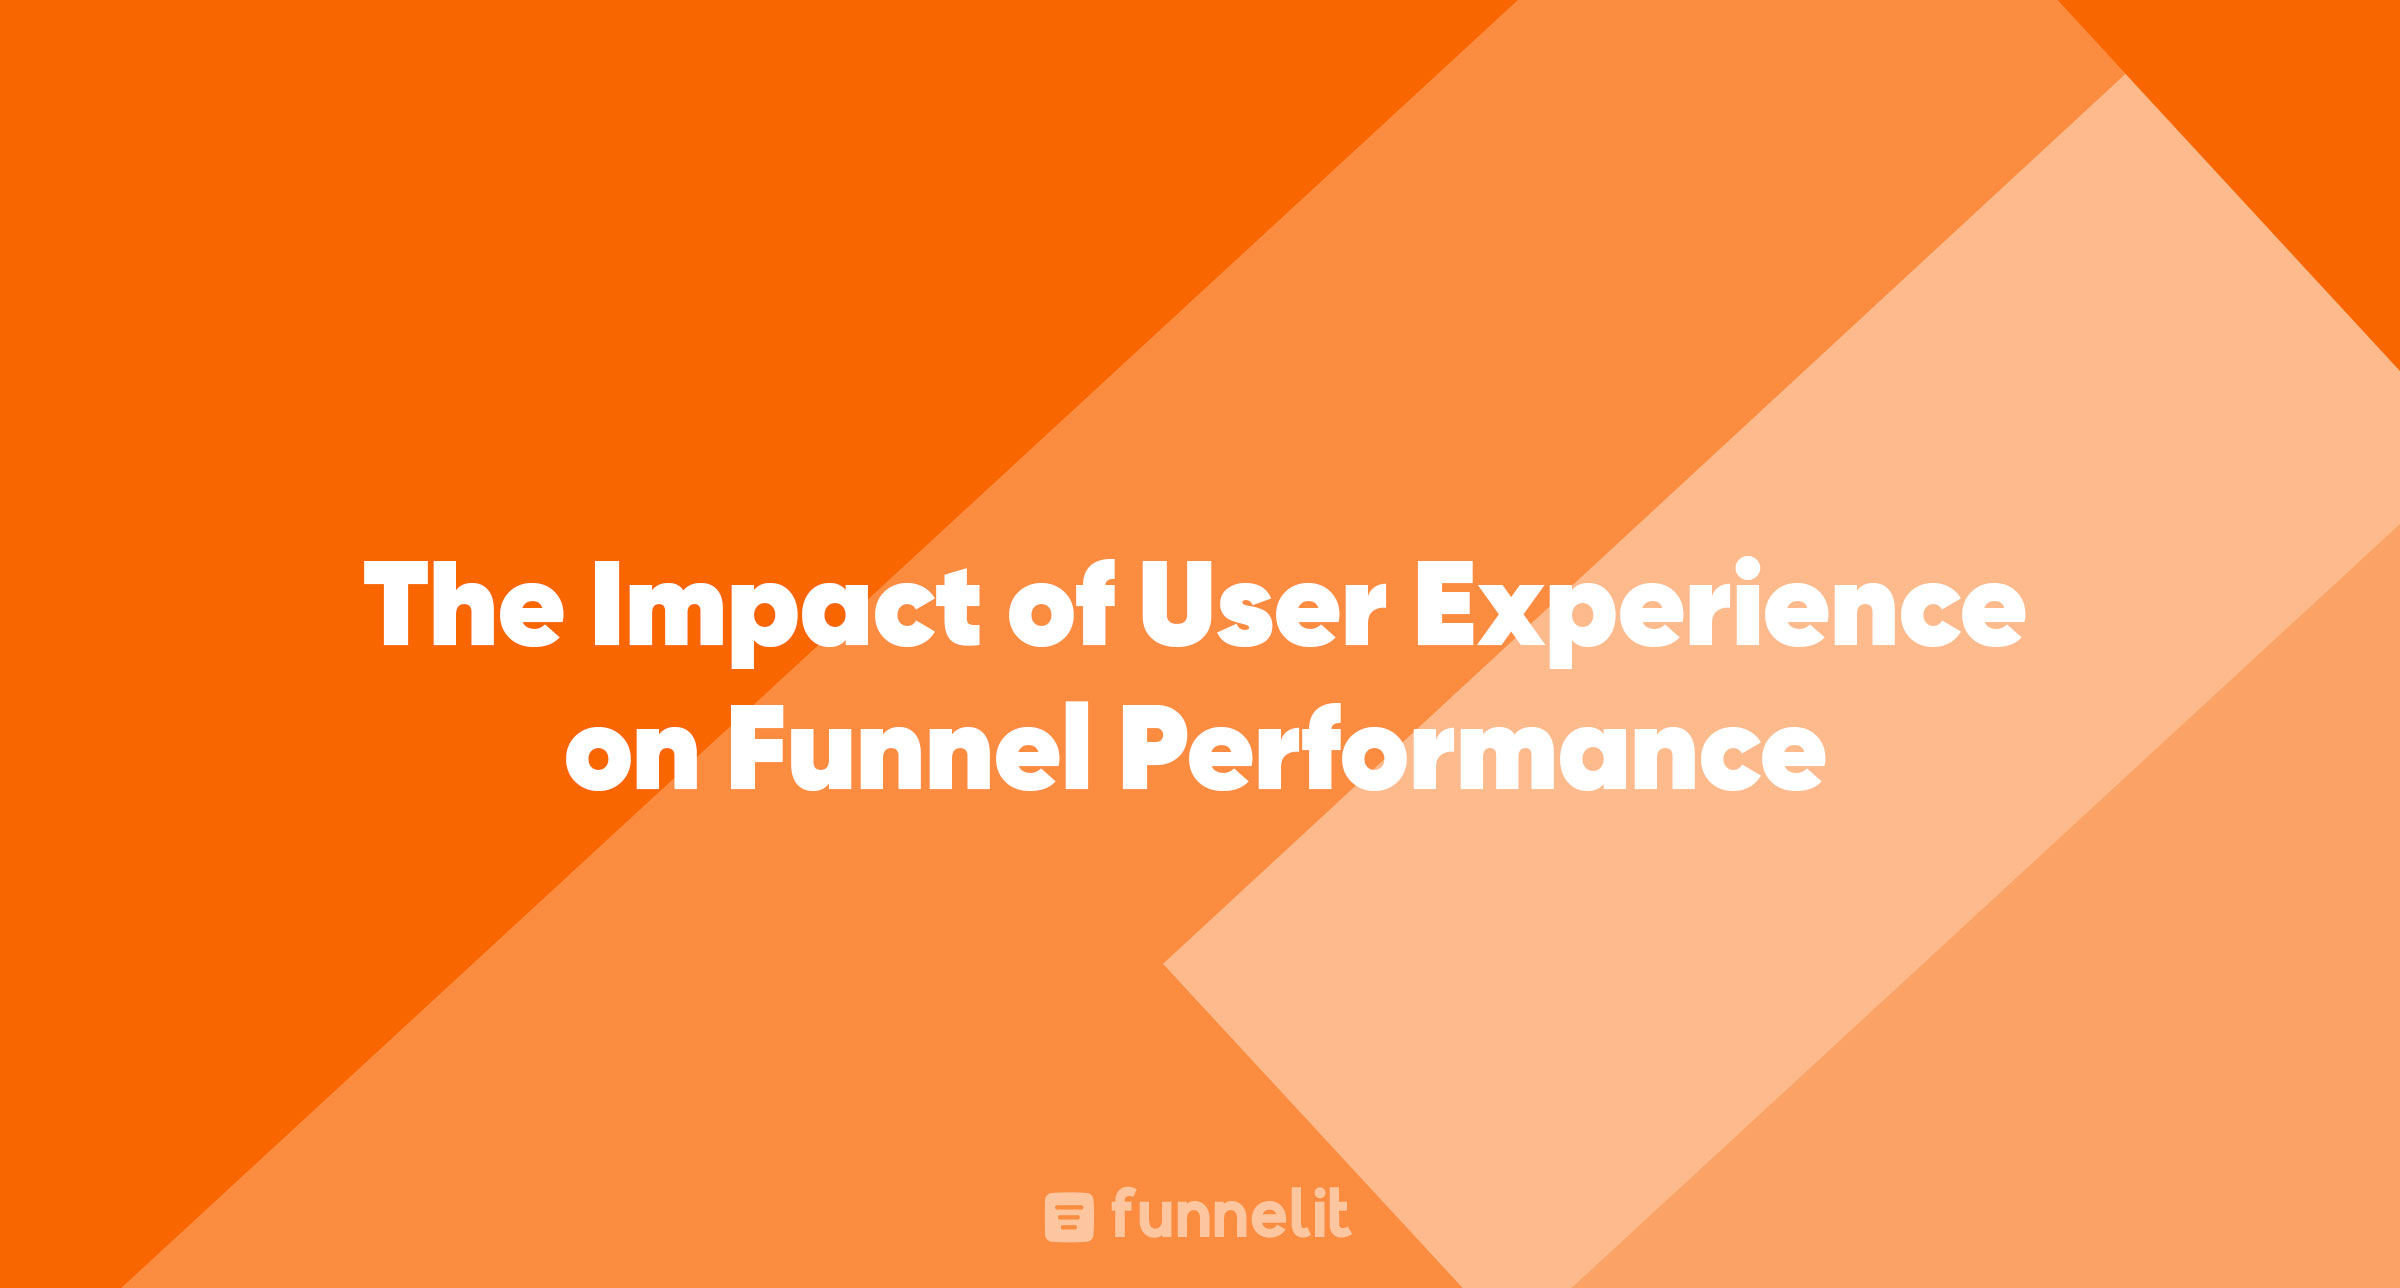 Article | The Impact of User Experience (UX) on Funnel Performance